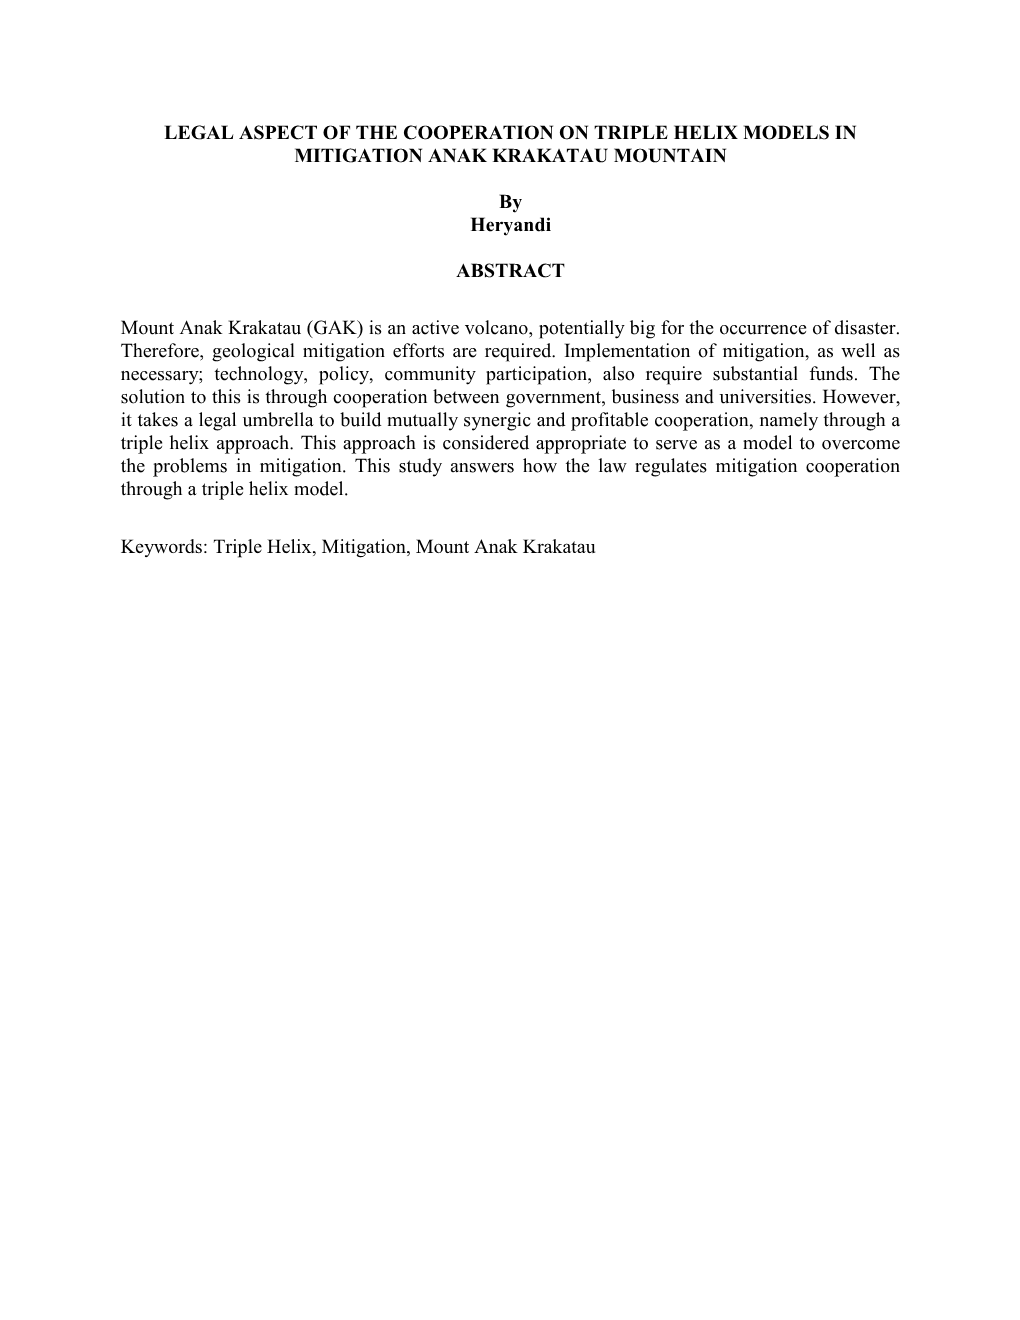 Legal Aspect of the Cooperation on Triple Helix Models in Mitigation Anak Krakatau Mountain